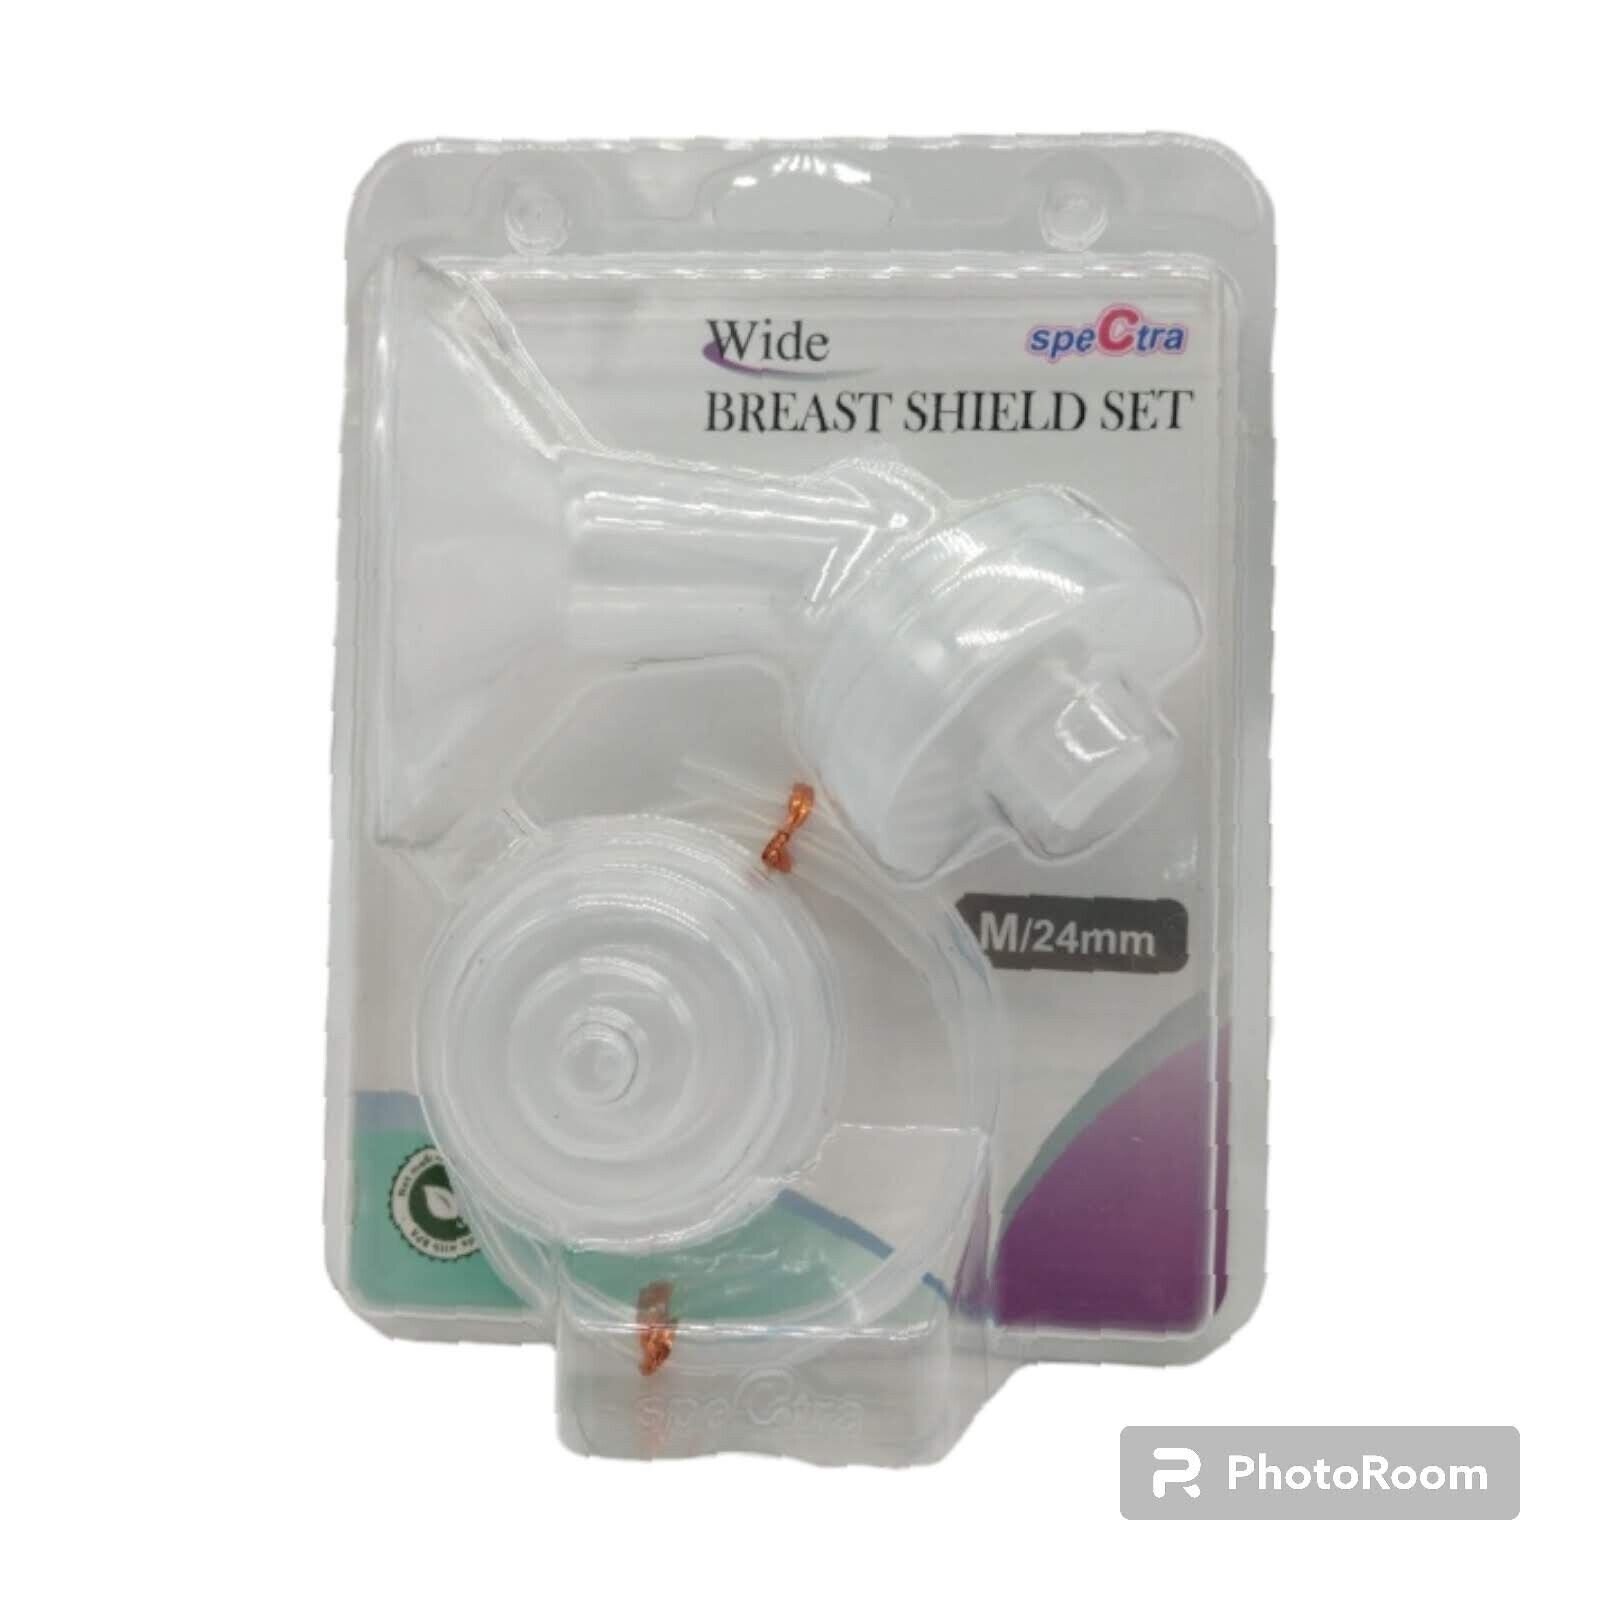 Spectra Breast Shield Set - Wide with Tubing M/24mm ky7BMEPk6